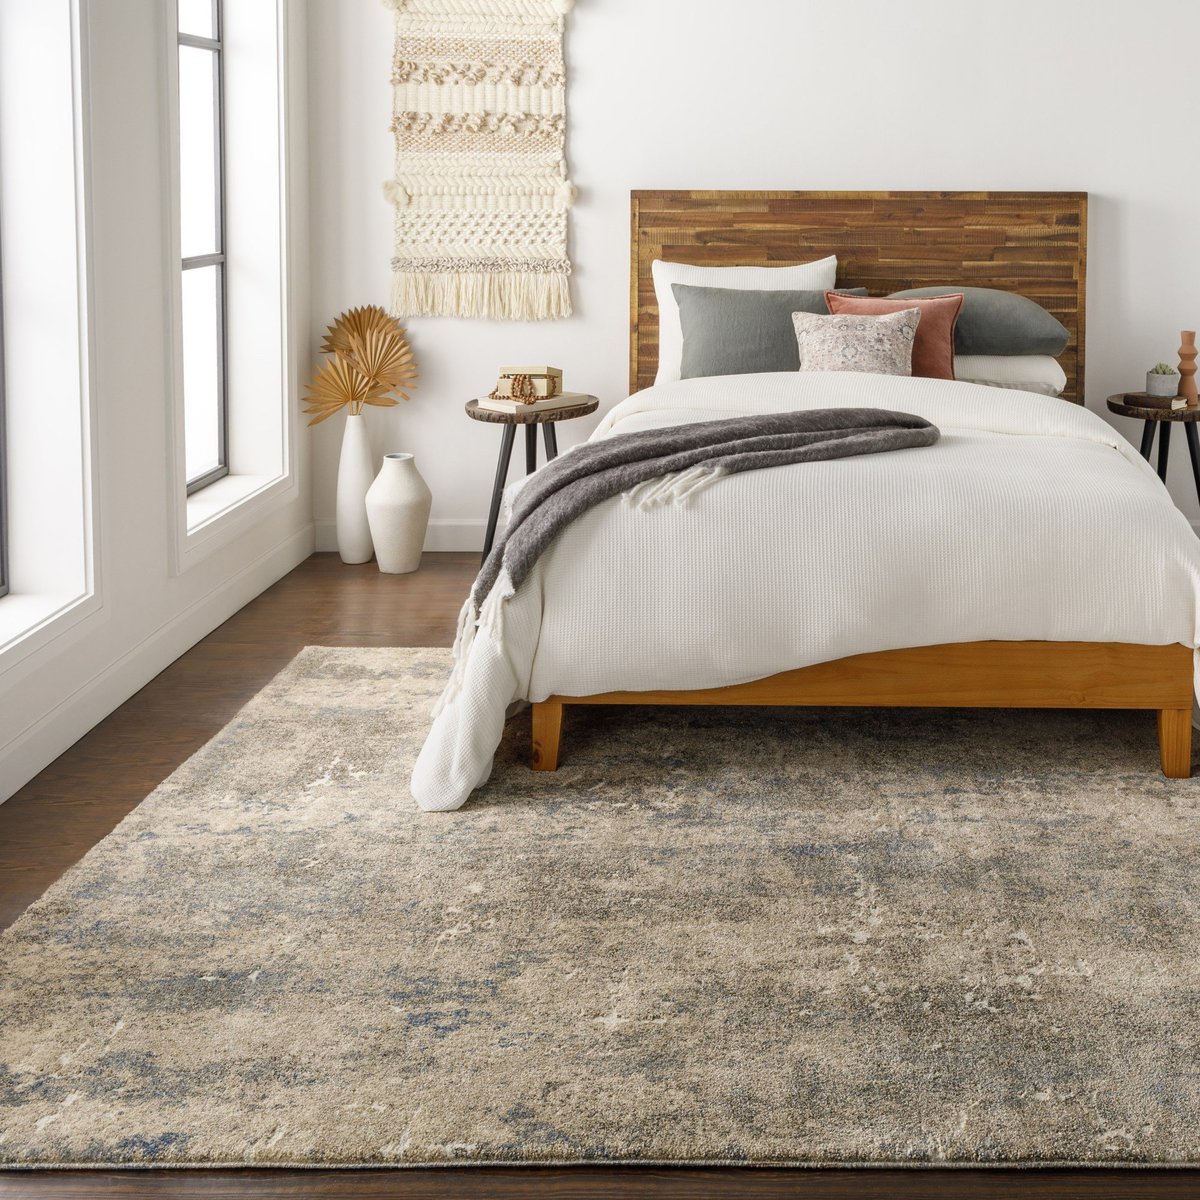 How to Place a Rug Under a Bed - Sizing & Positioning